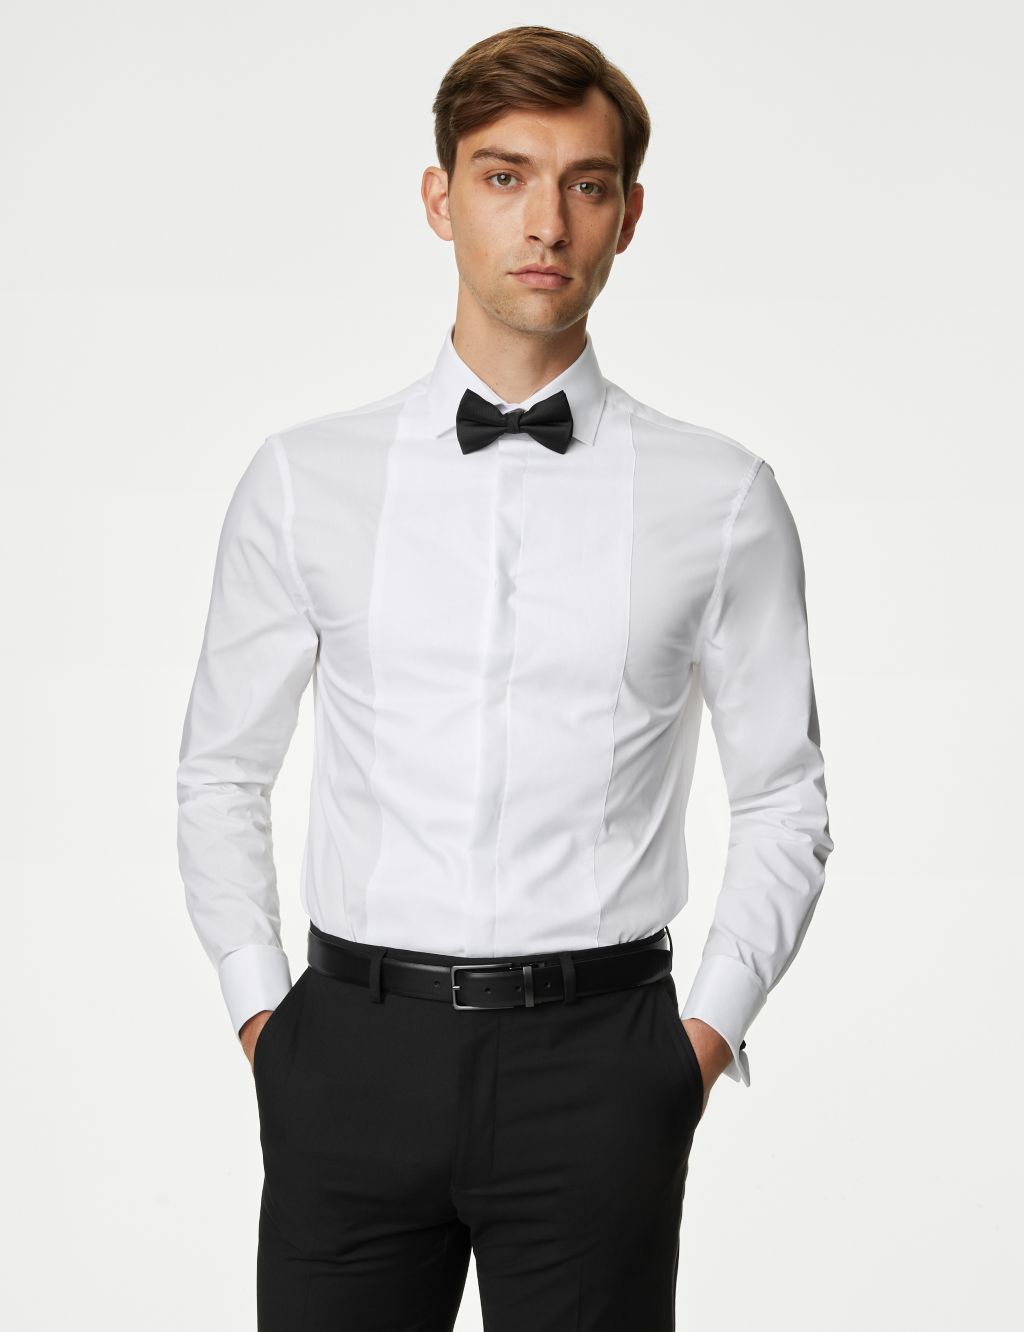 Tailored Fit Dress Shirt with Bow Tie image 1